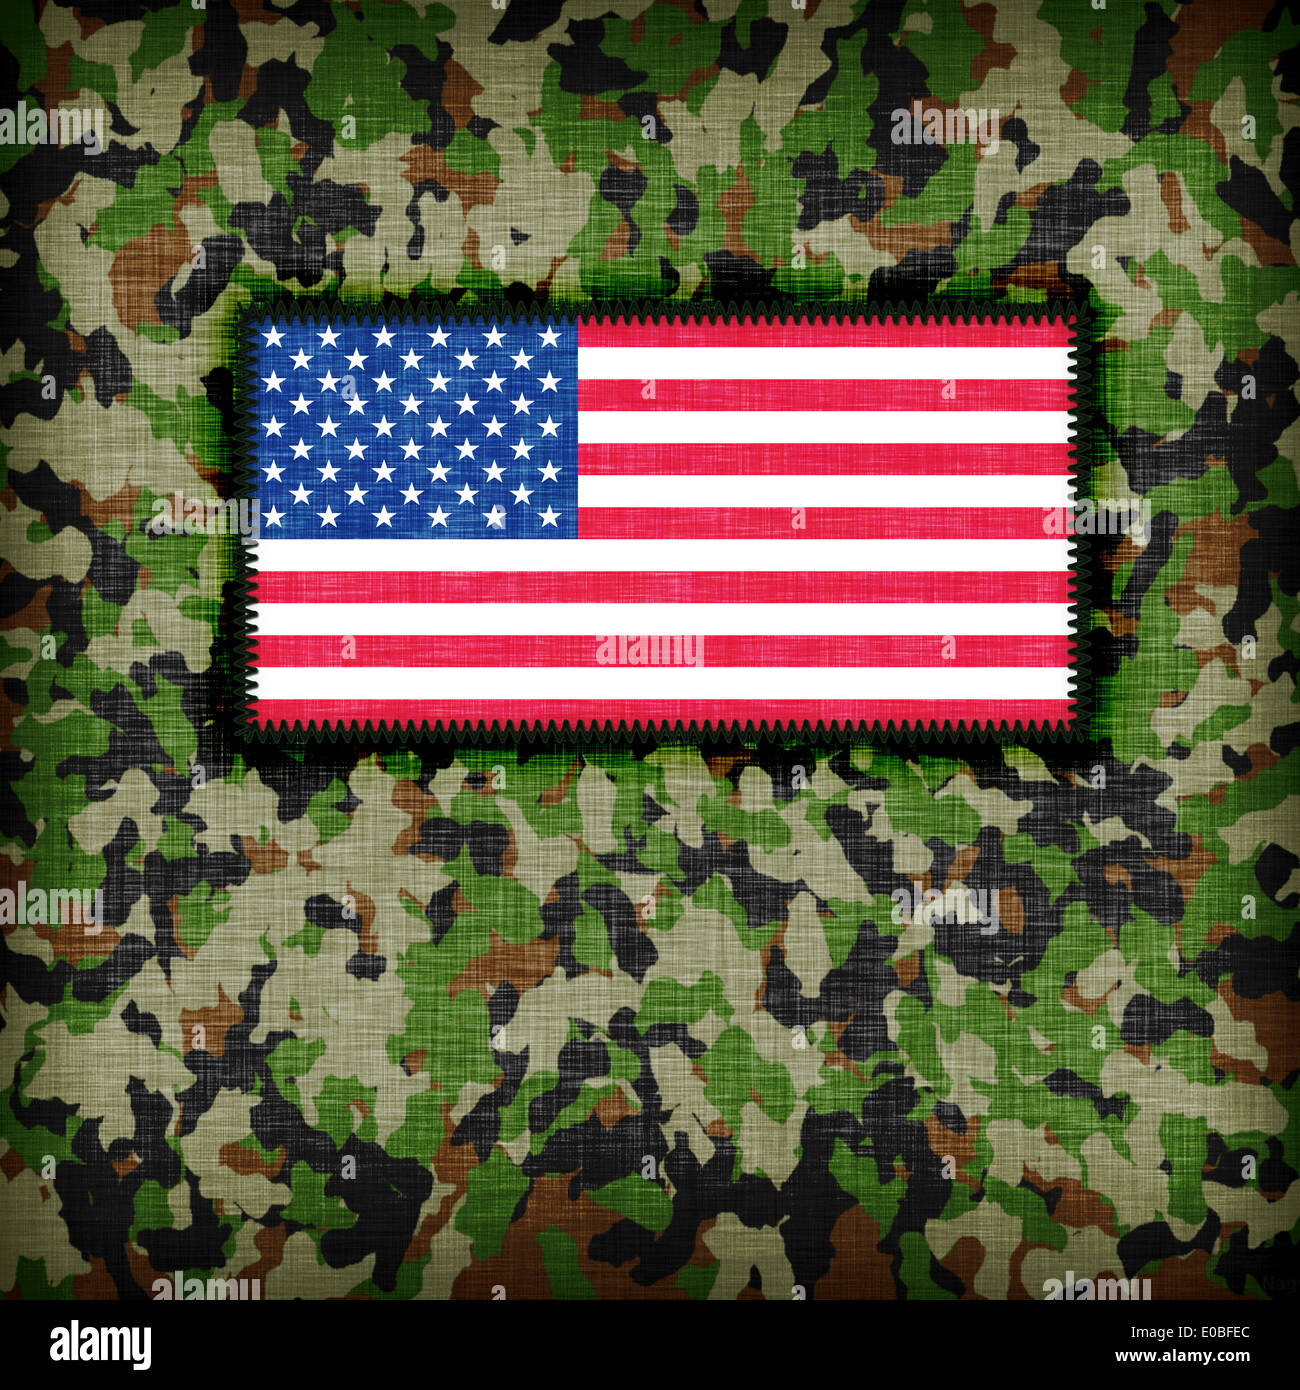 American Flag Rectangle Patch - Cal Uniforms